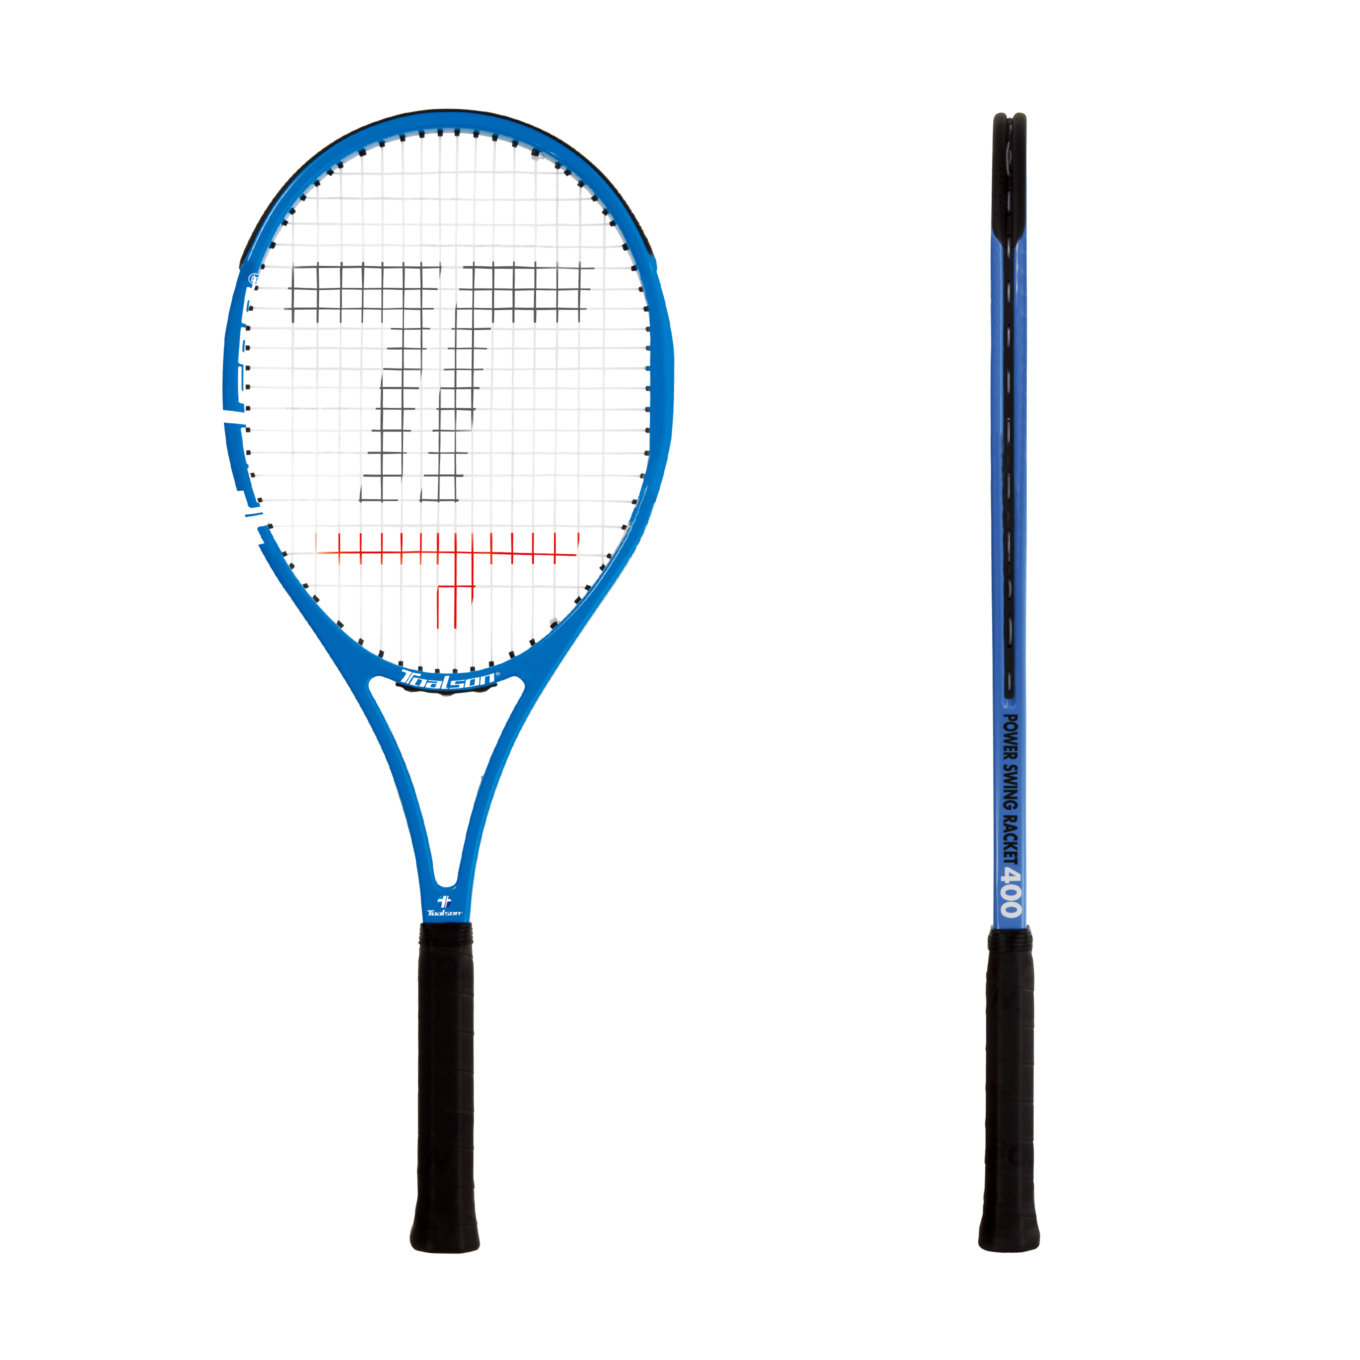 Power Swing Racket 400 1dr Toalson Roche Official Online Site